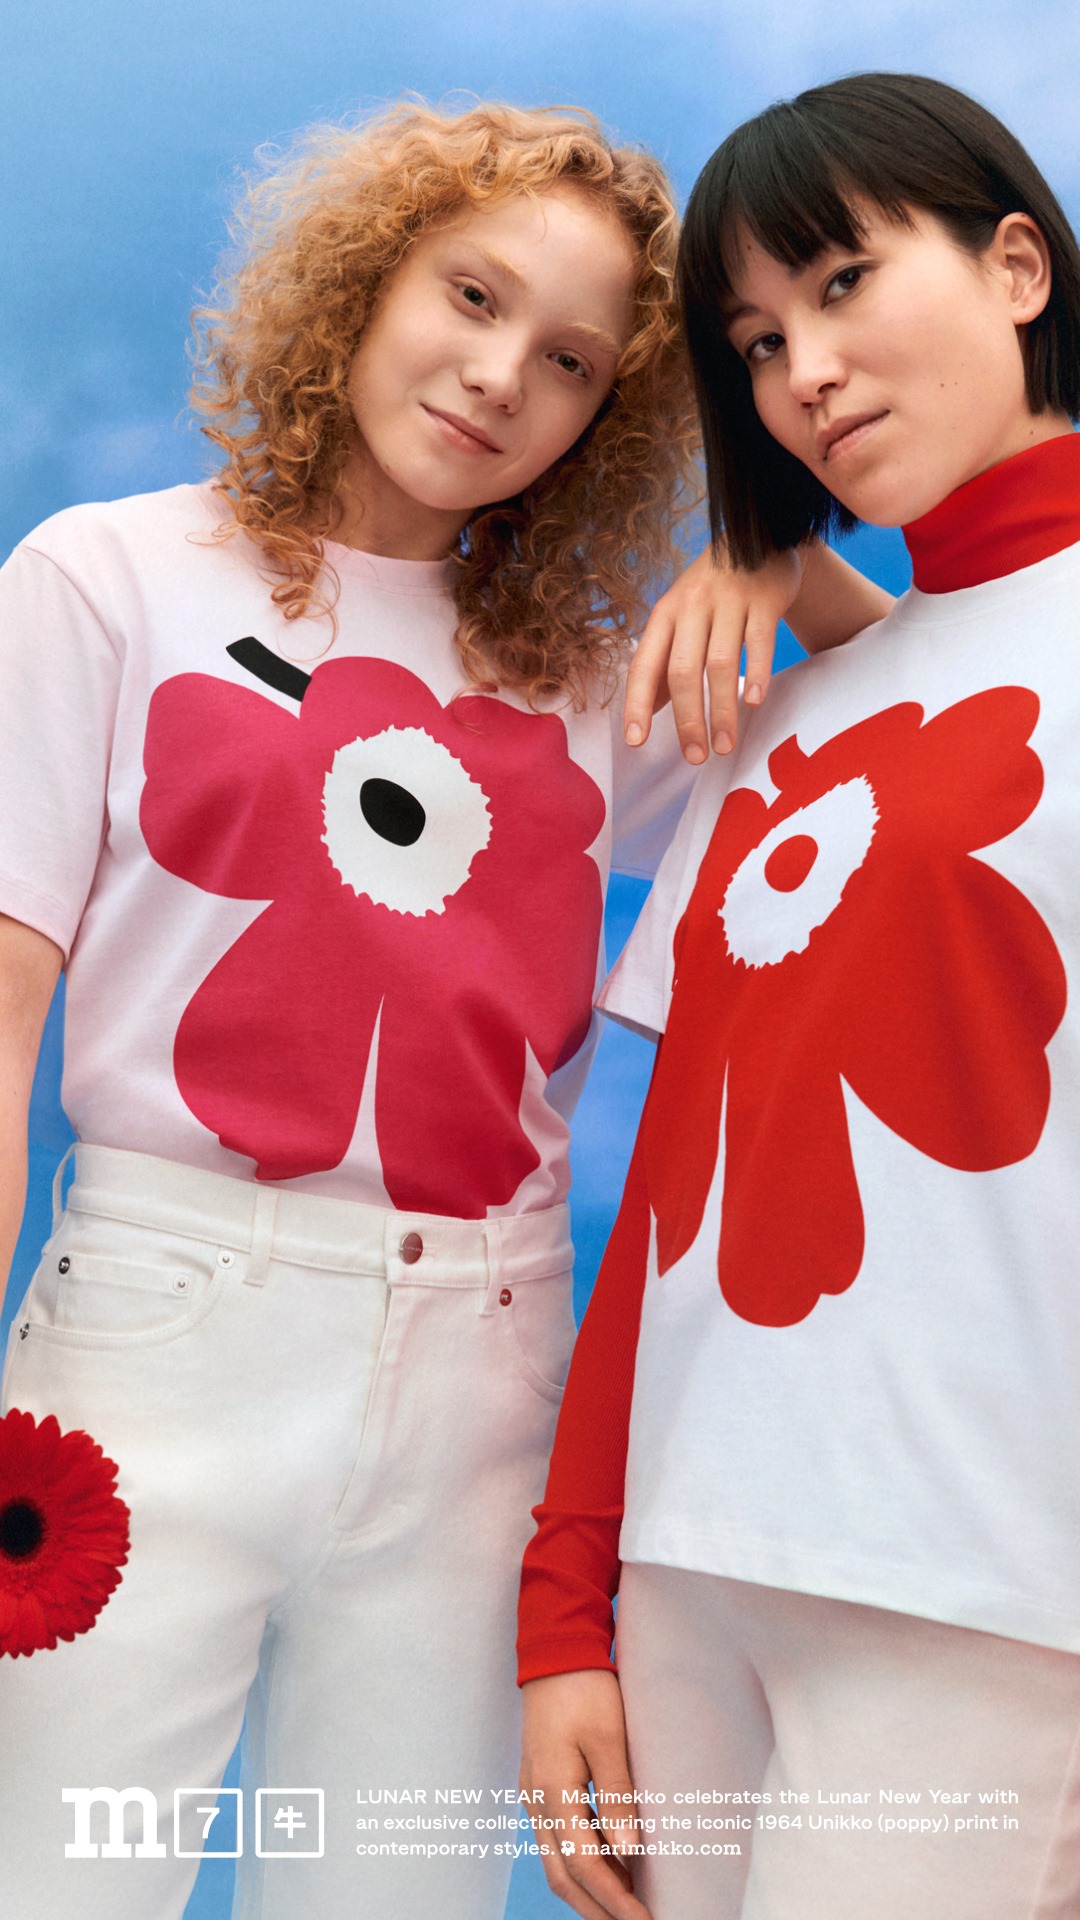 Marimekko Hong Kong release limited collection for Chinese New Year